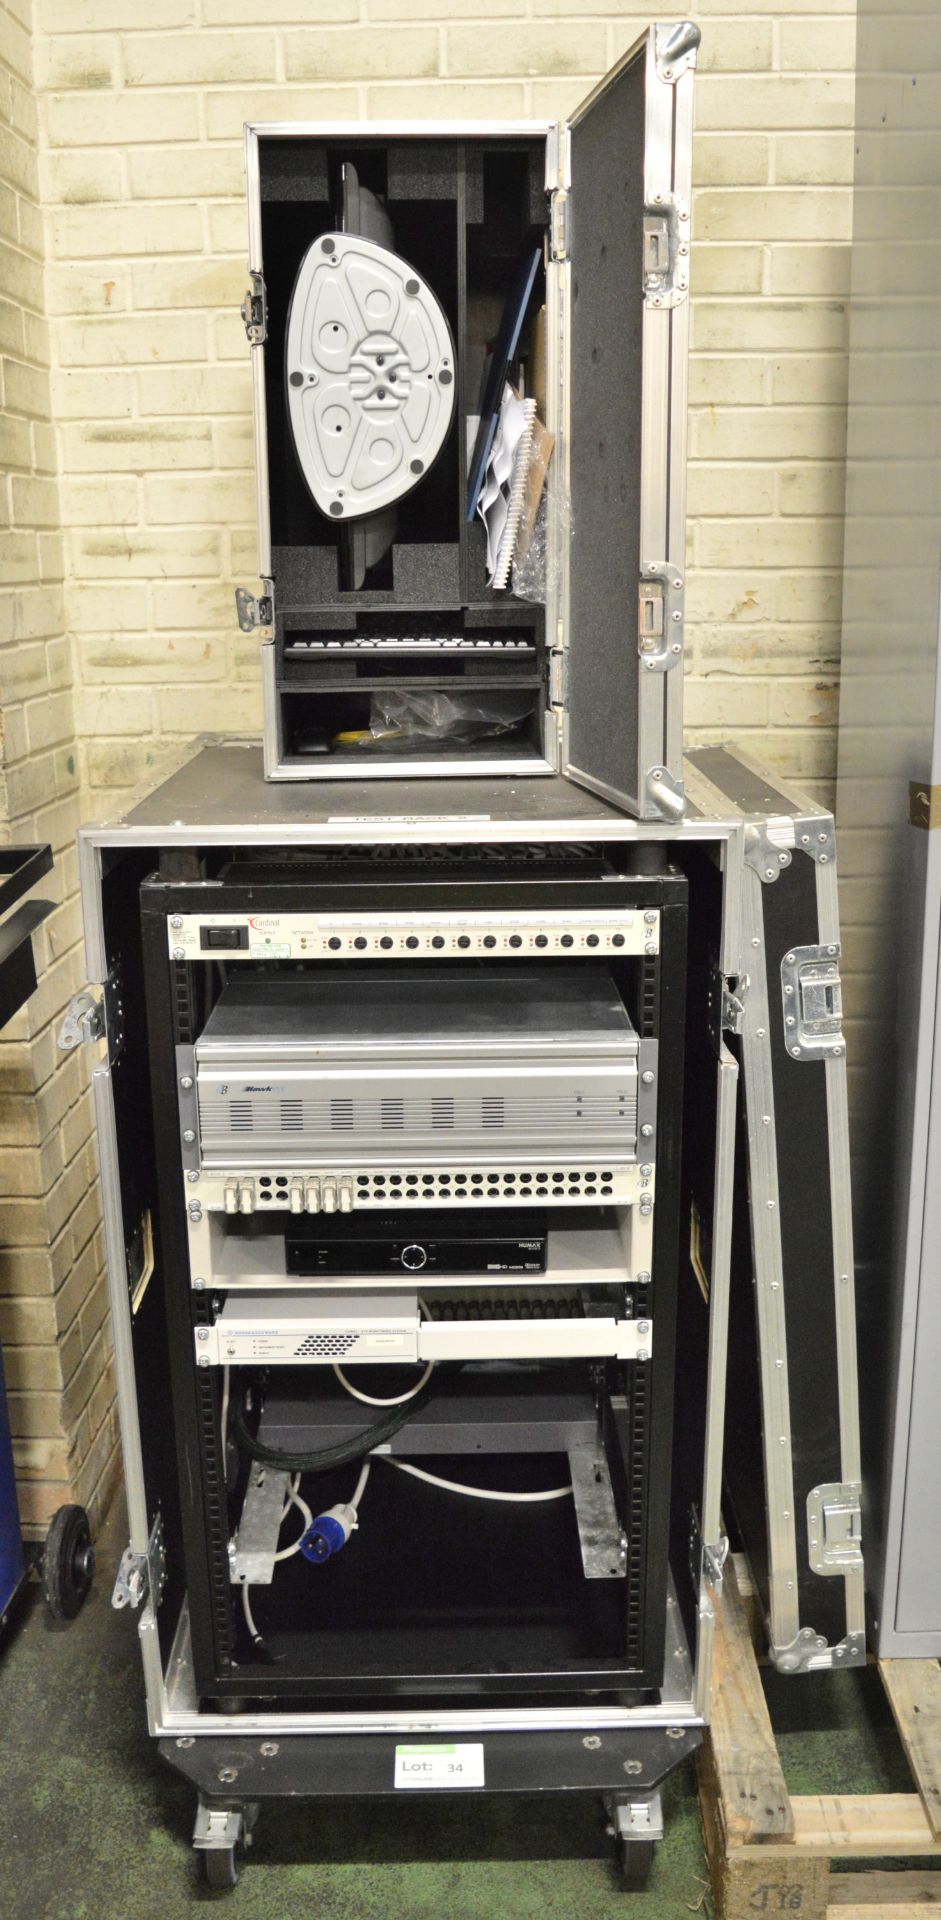 Rohde & Schwarz DVMS1 DTV Monitoring System in 2x Carry Cases.